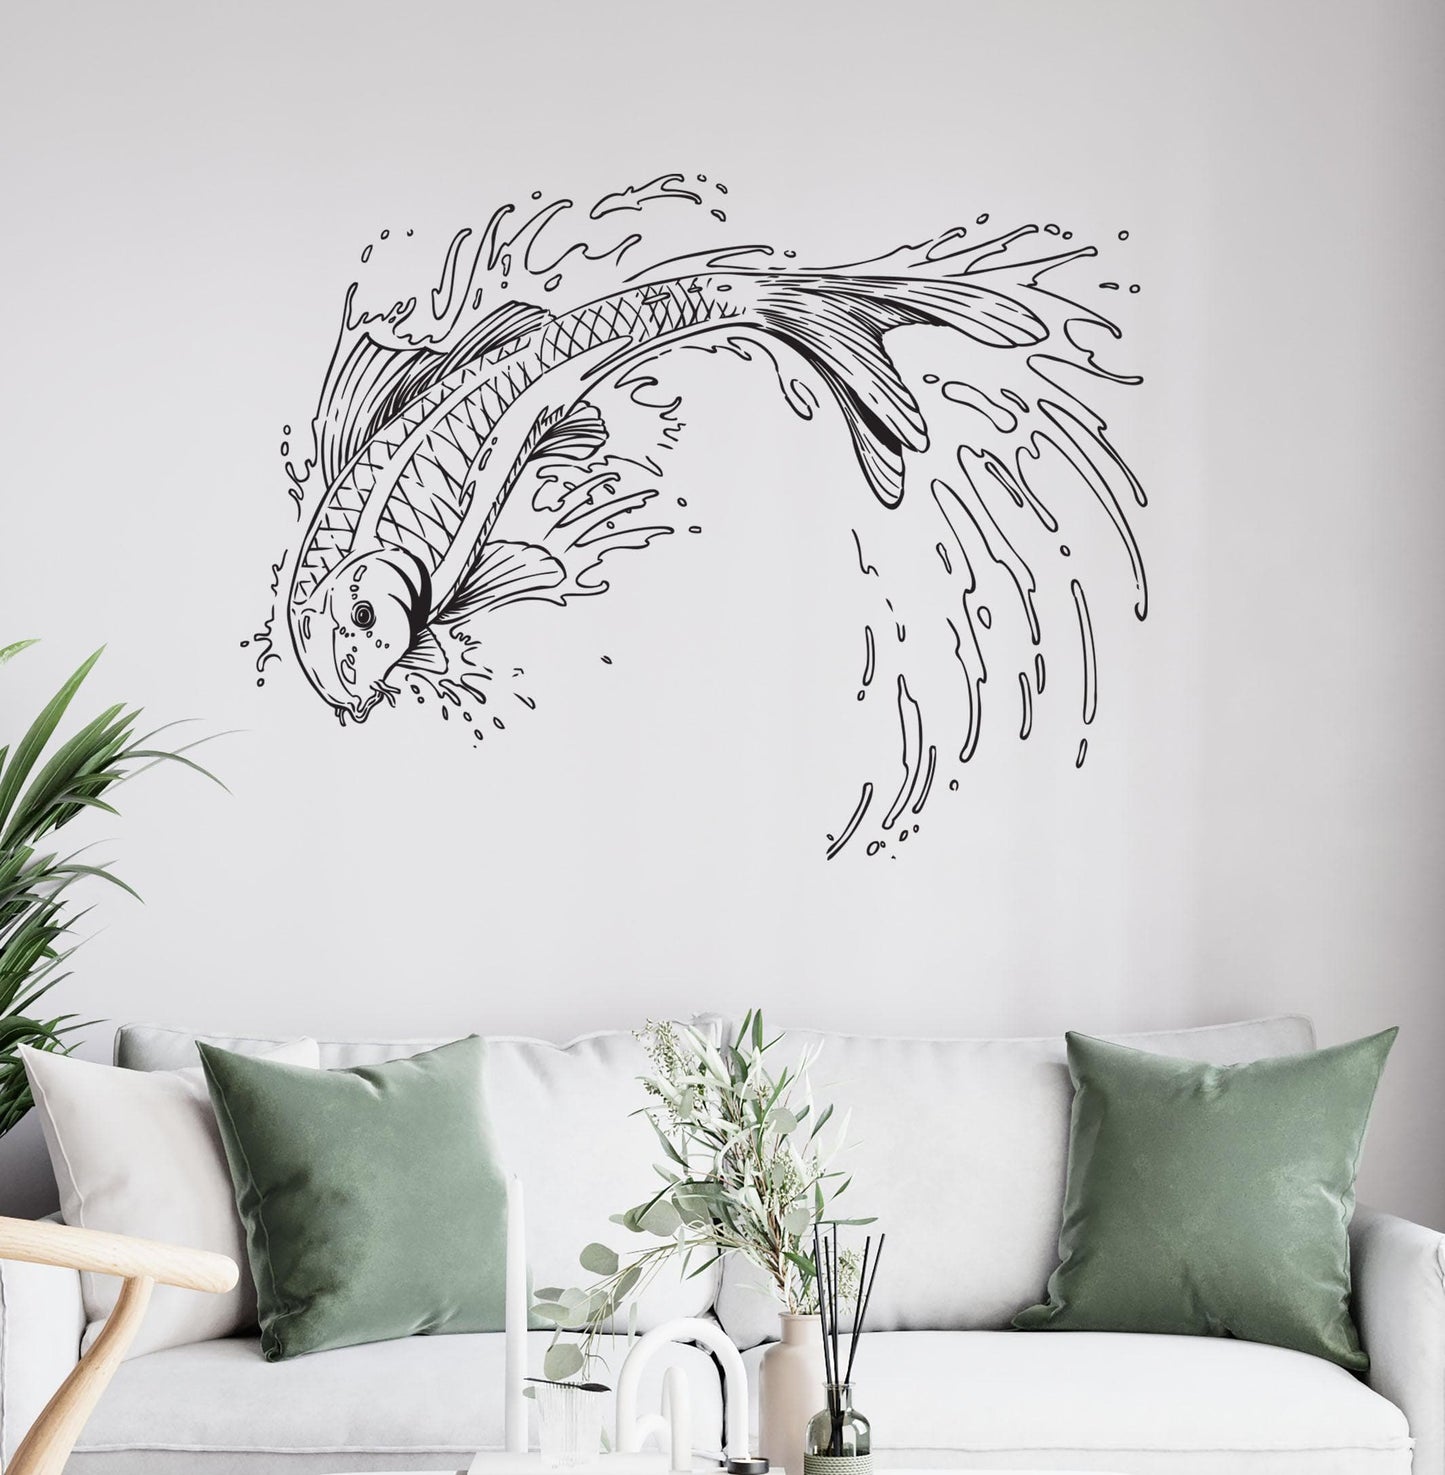 Japanese Koi Fish Jumping out of Pond Wall Decal. Asian Theme Decor. #367